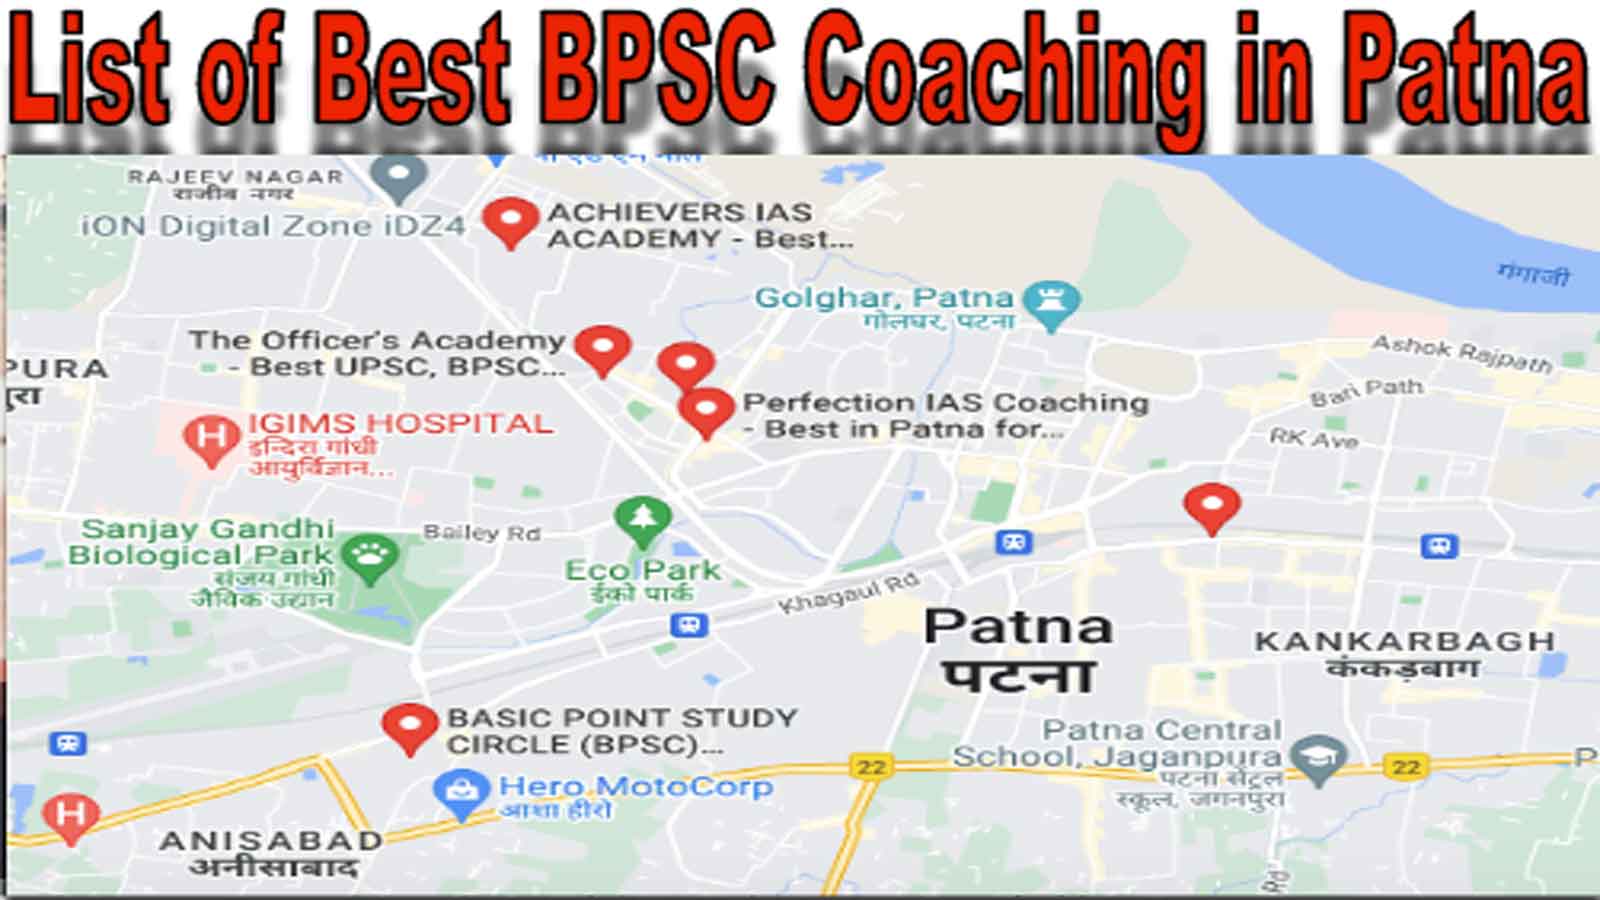 List of Best BPSC Coaching in Patna 2022